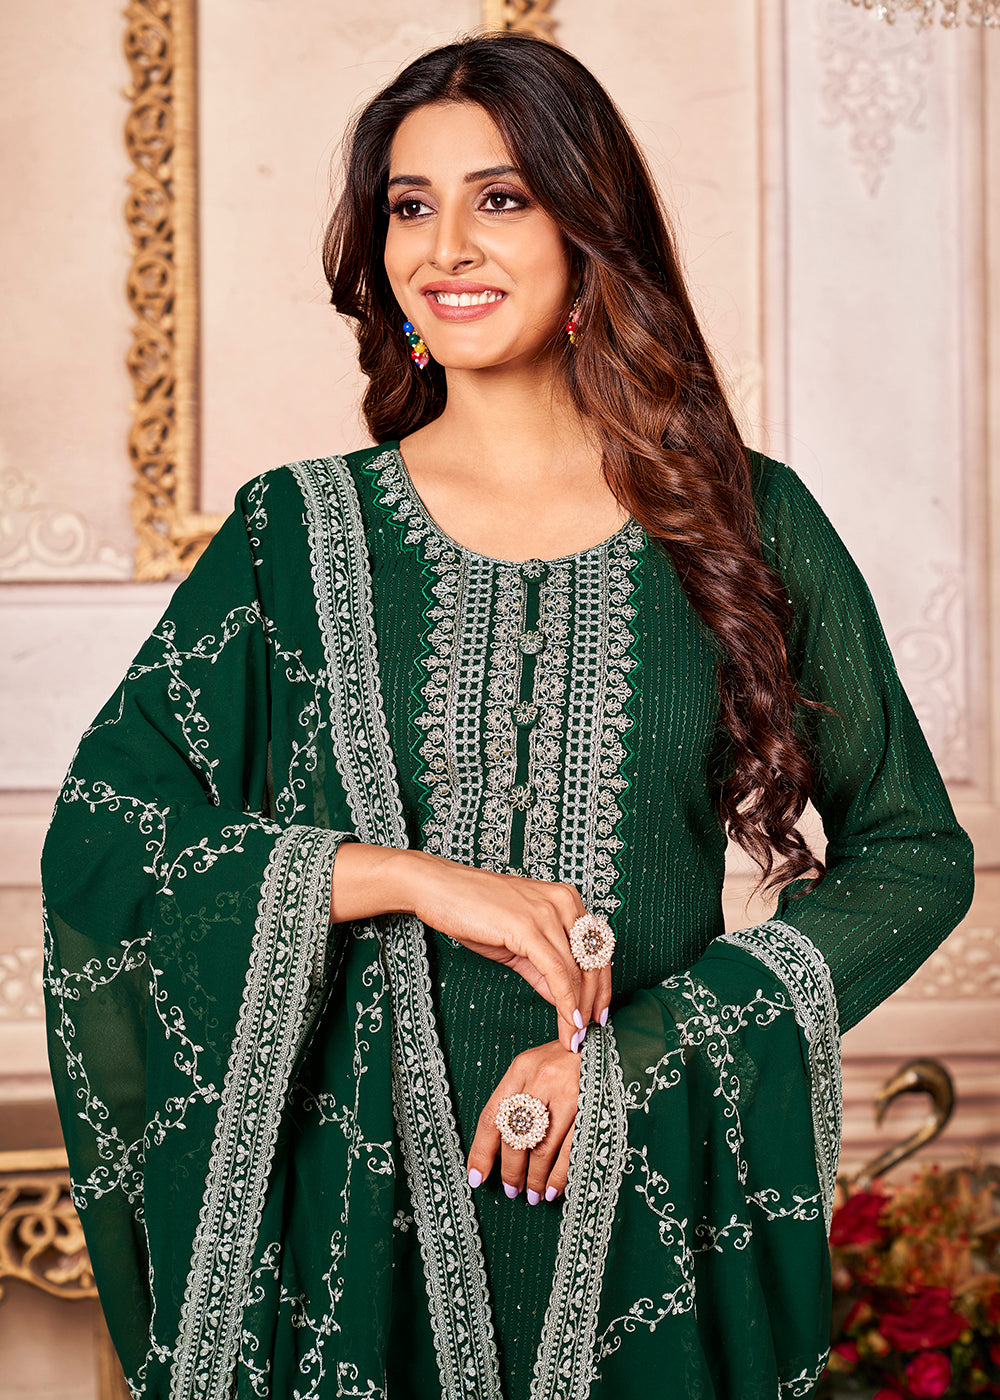 Buy Now Marvelous Green Indian Georgette Ceremonial Salwar Suit Online in USA, UK, Canada & Worldwide at Empress Clothing.